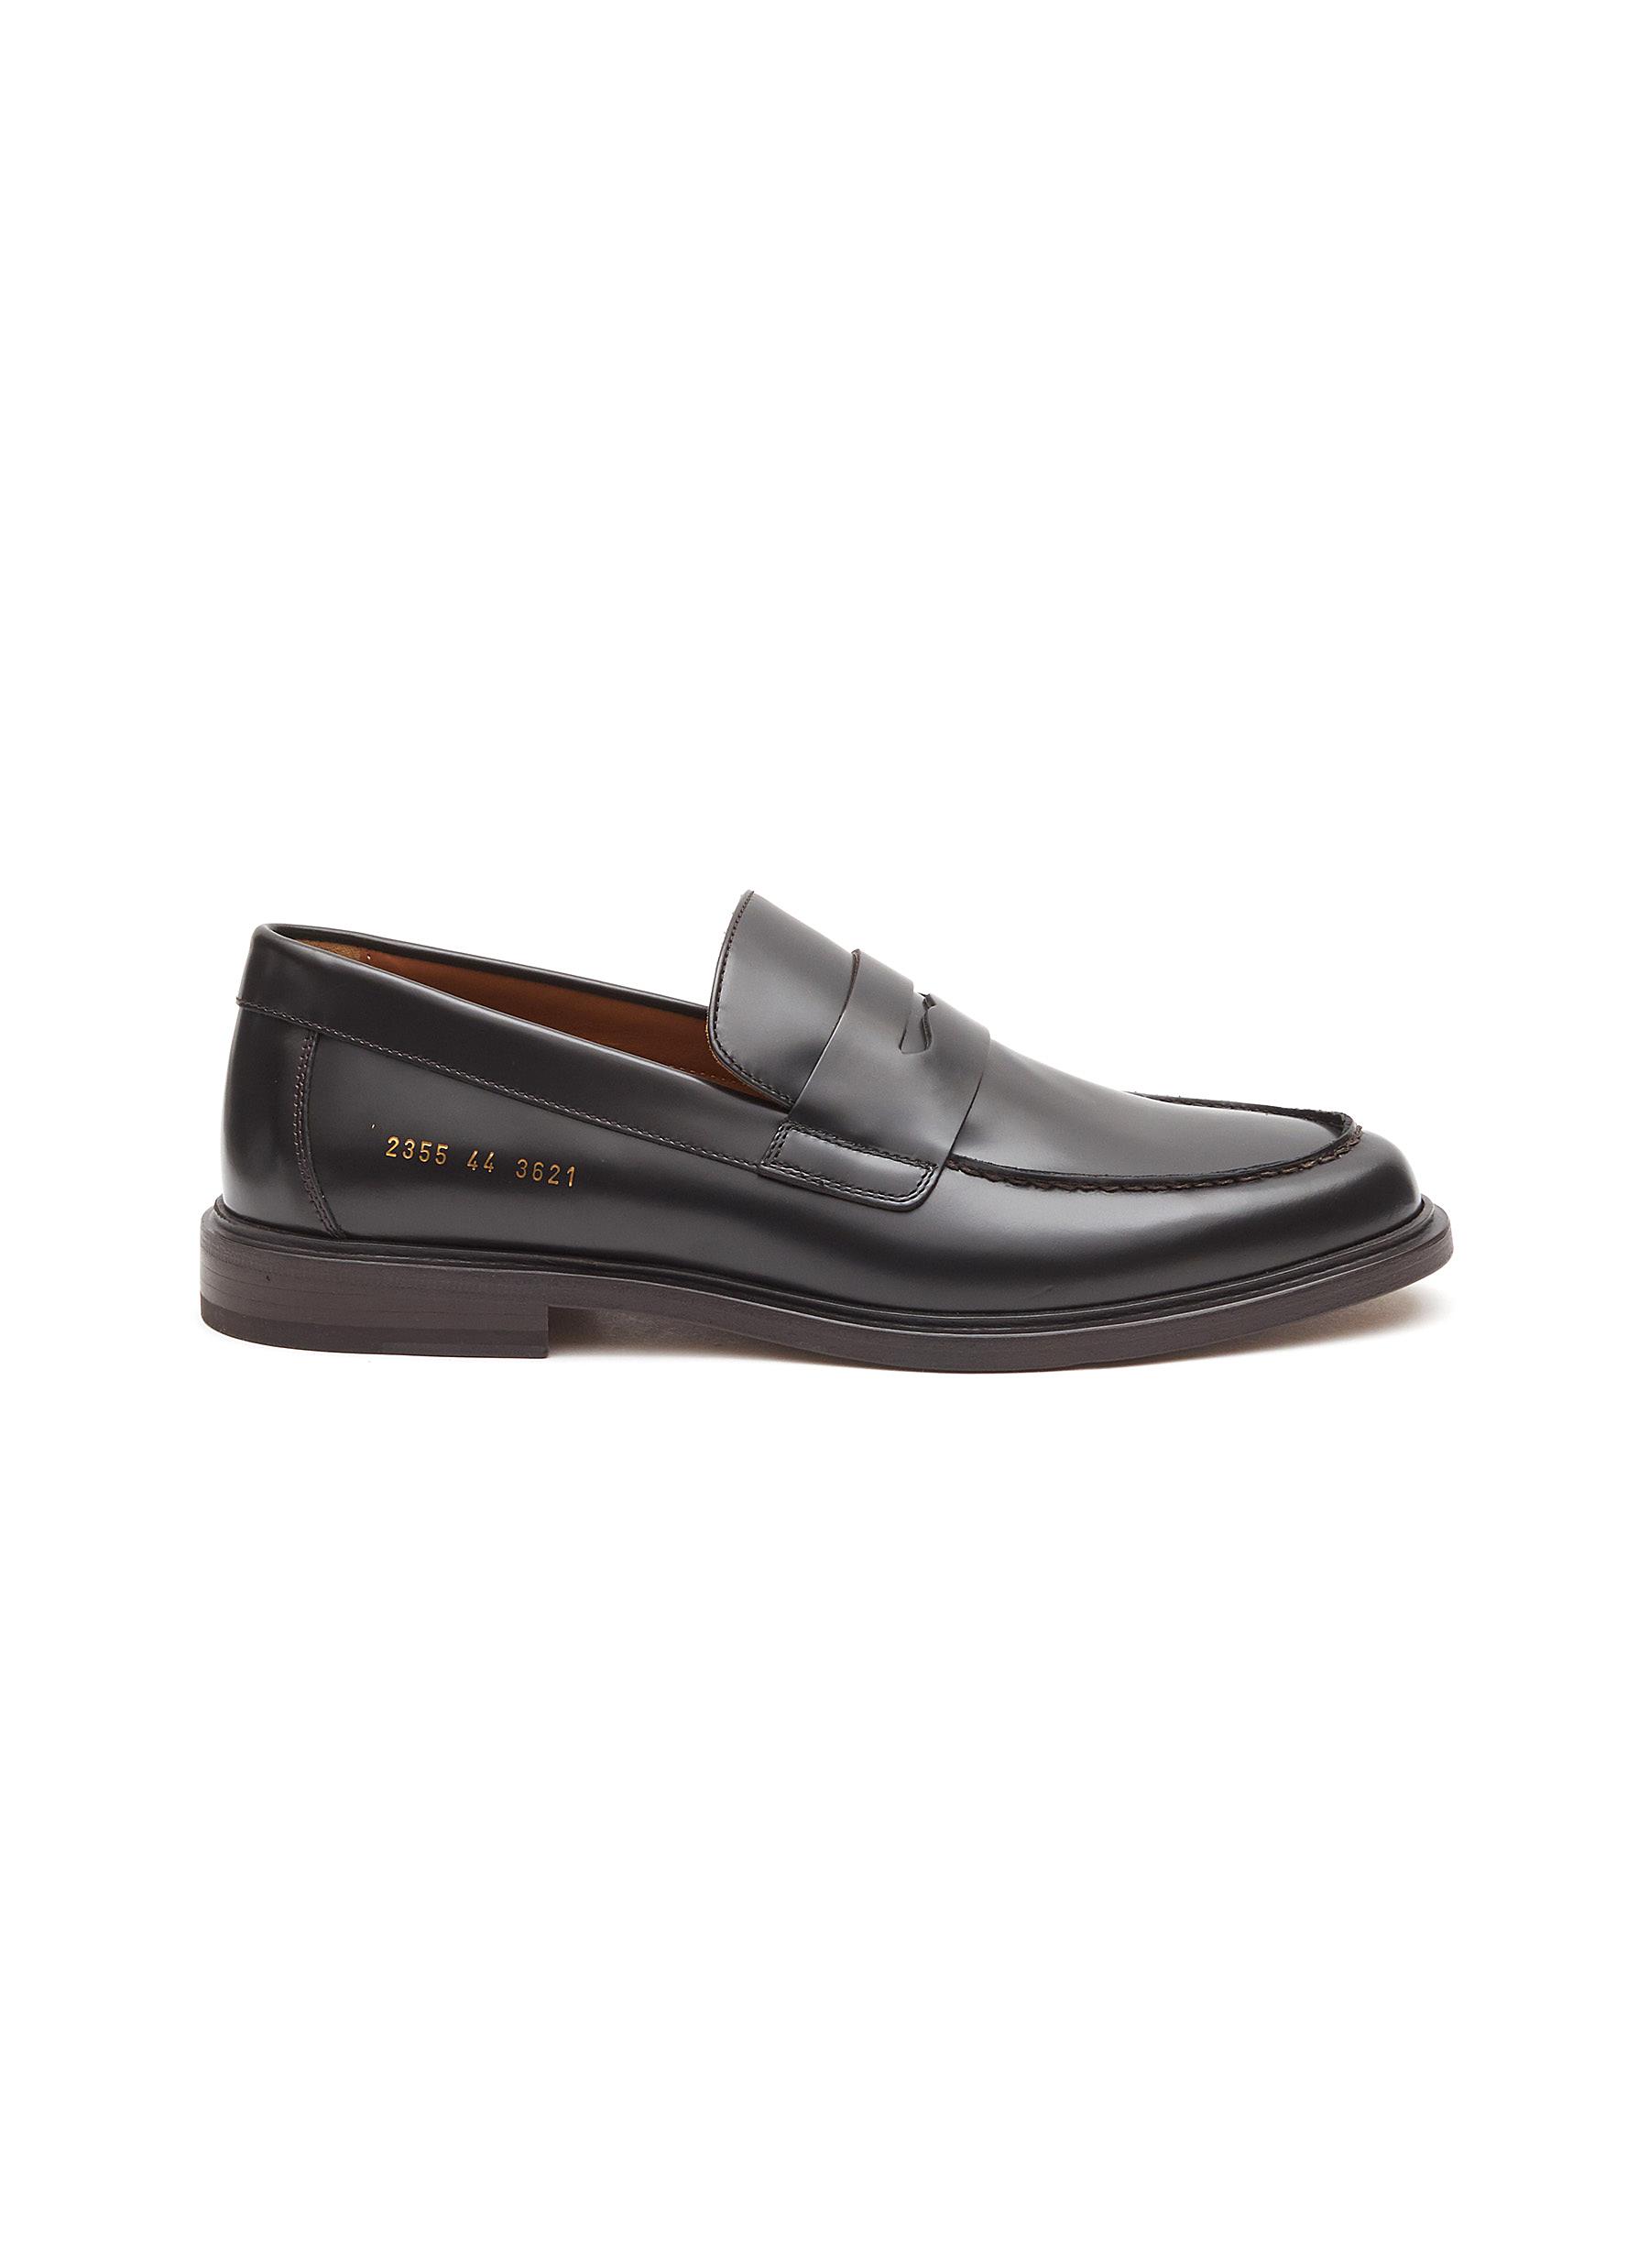 Almond-Toed Leather Penny Loafers